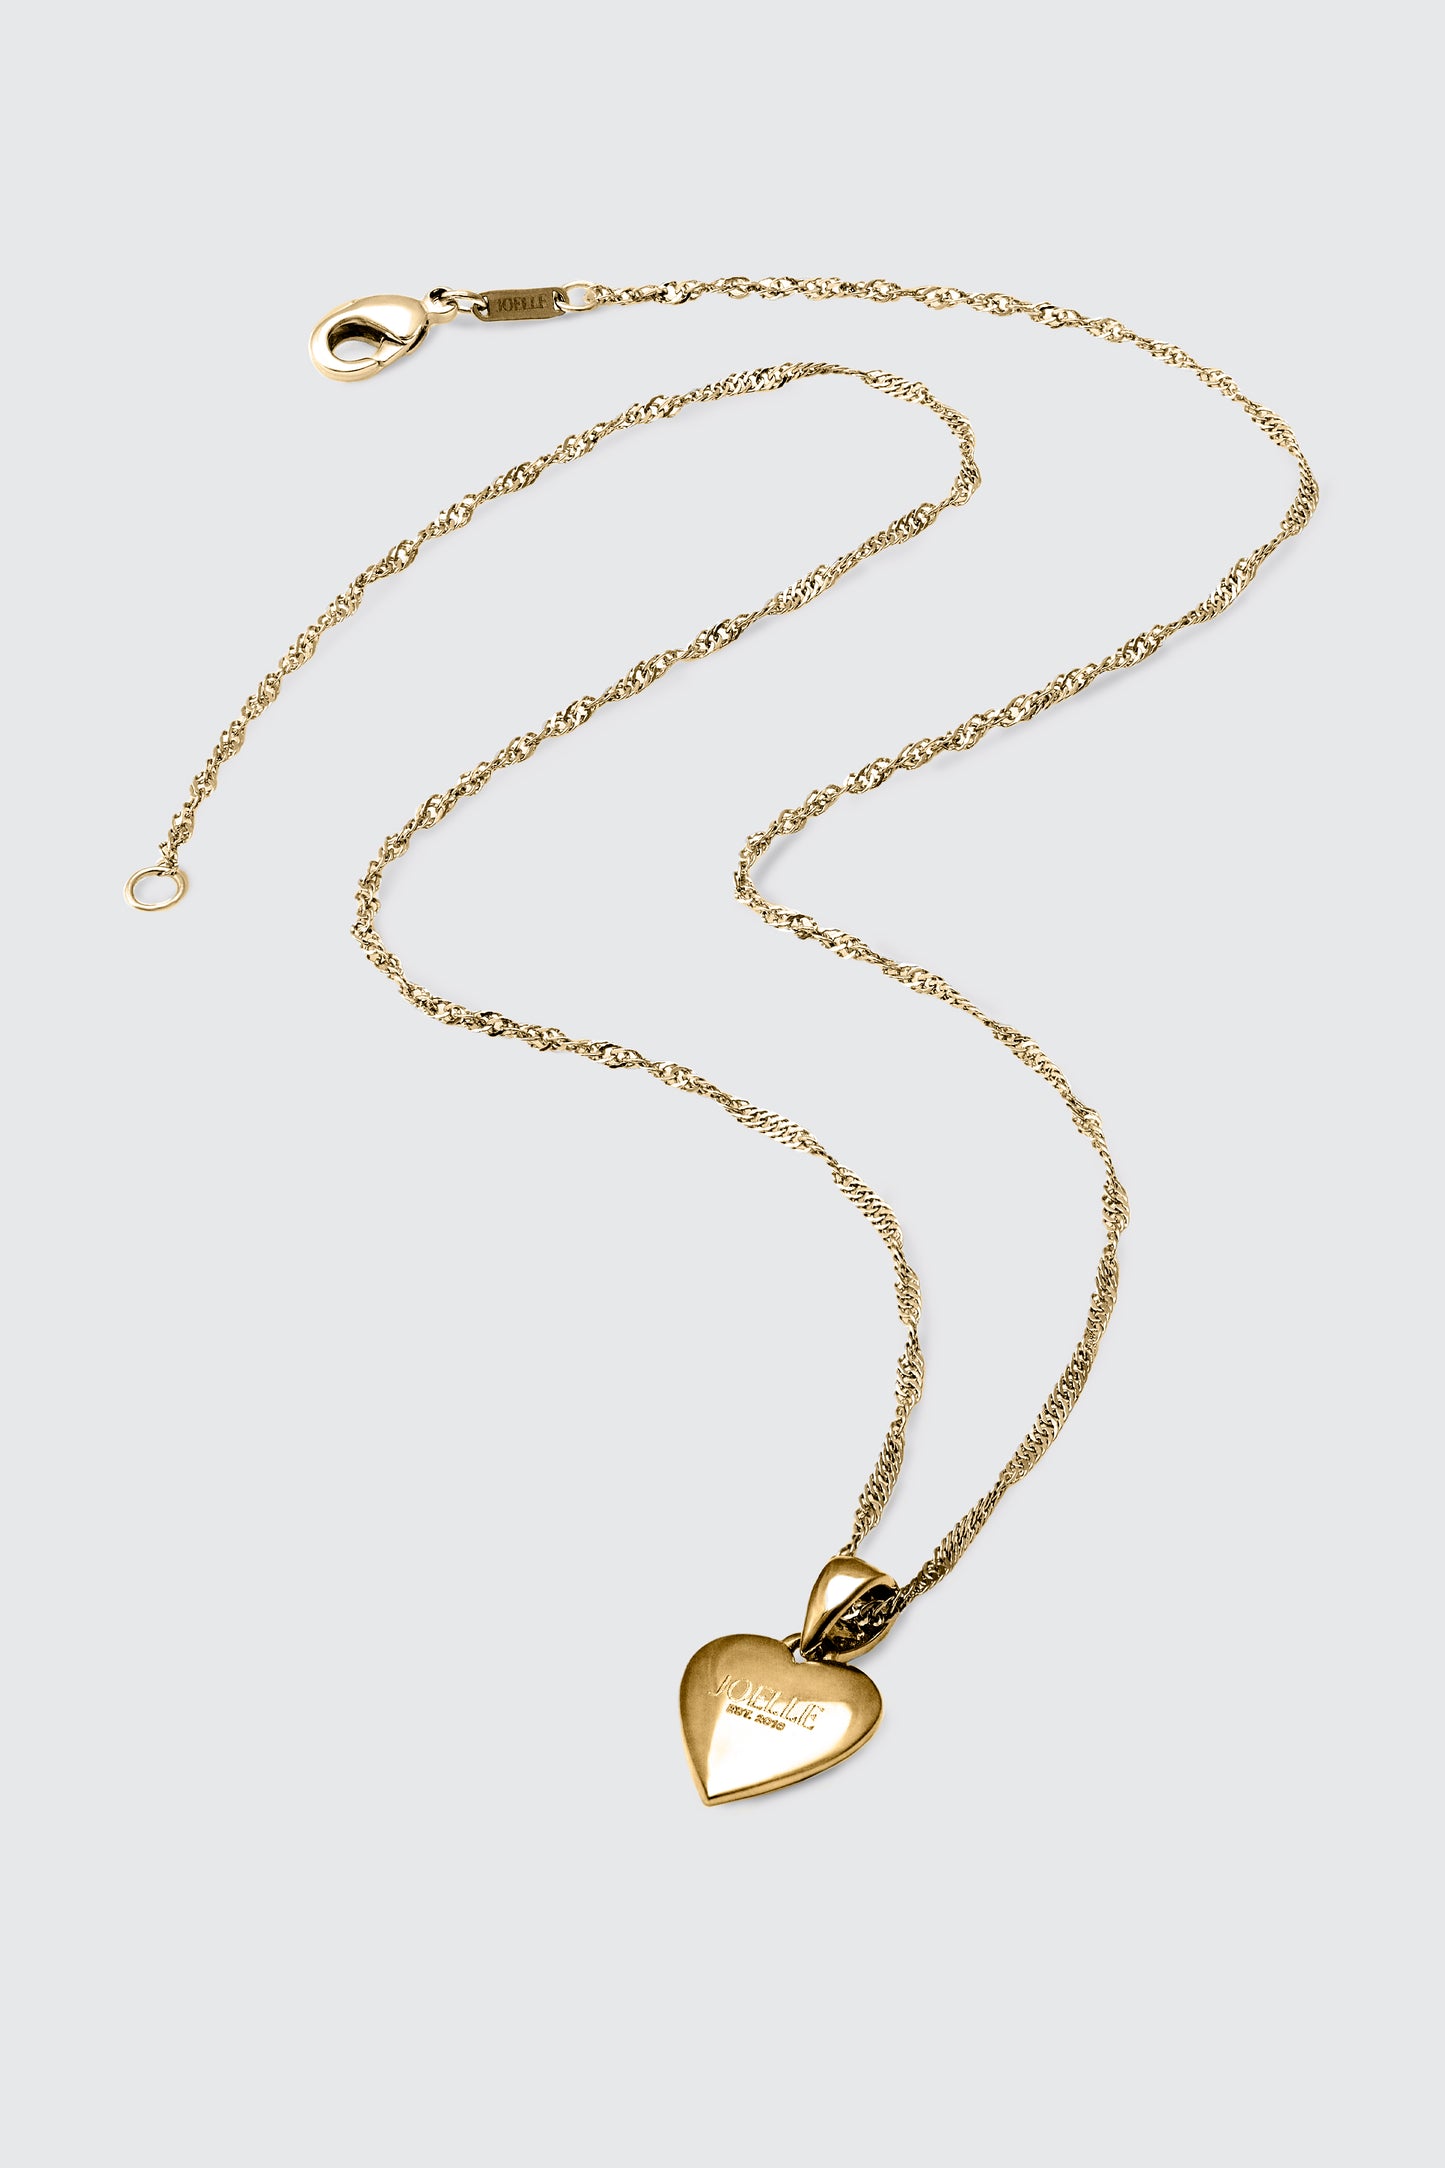 Gold necklace with heart pendant | Ridge